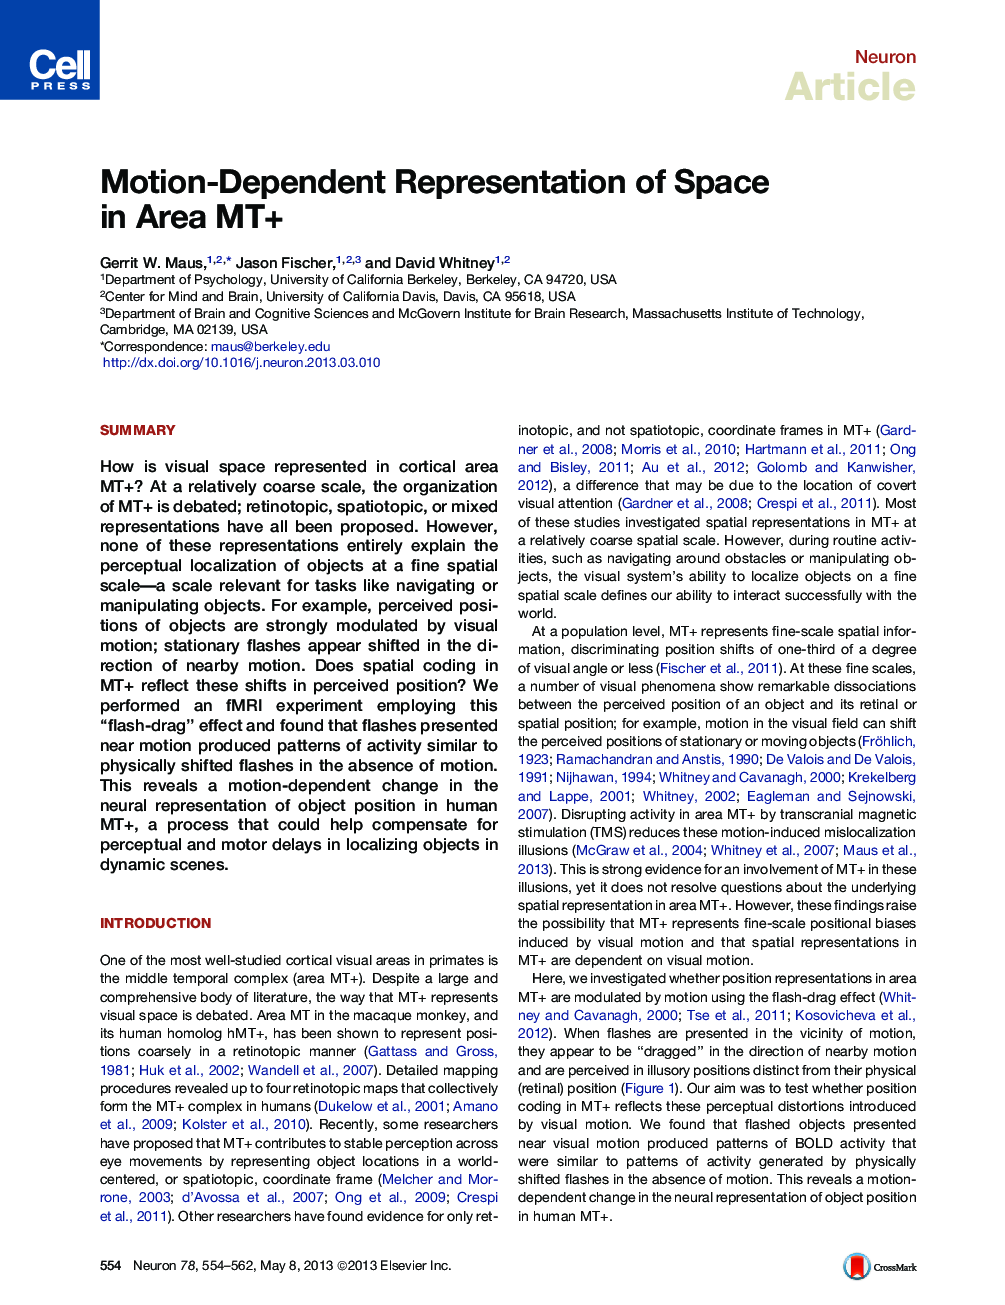 Motion-Dependent Representation of Space in Area MT+